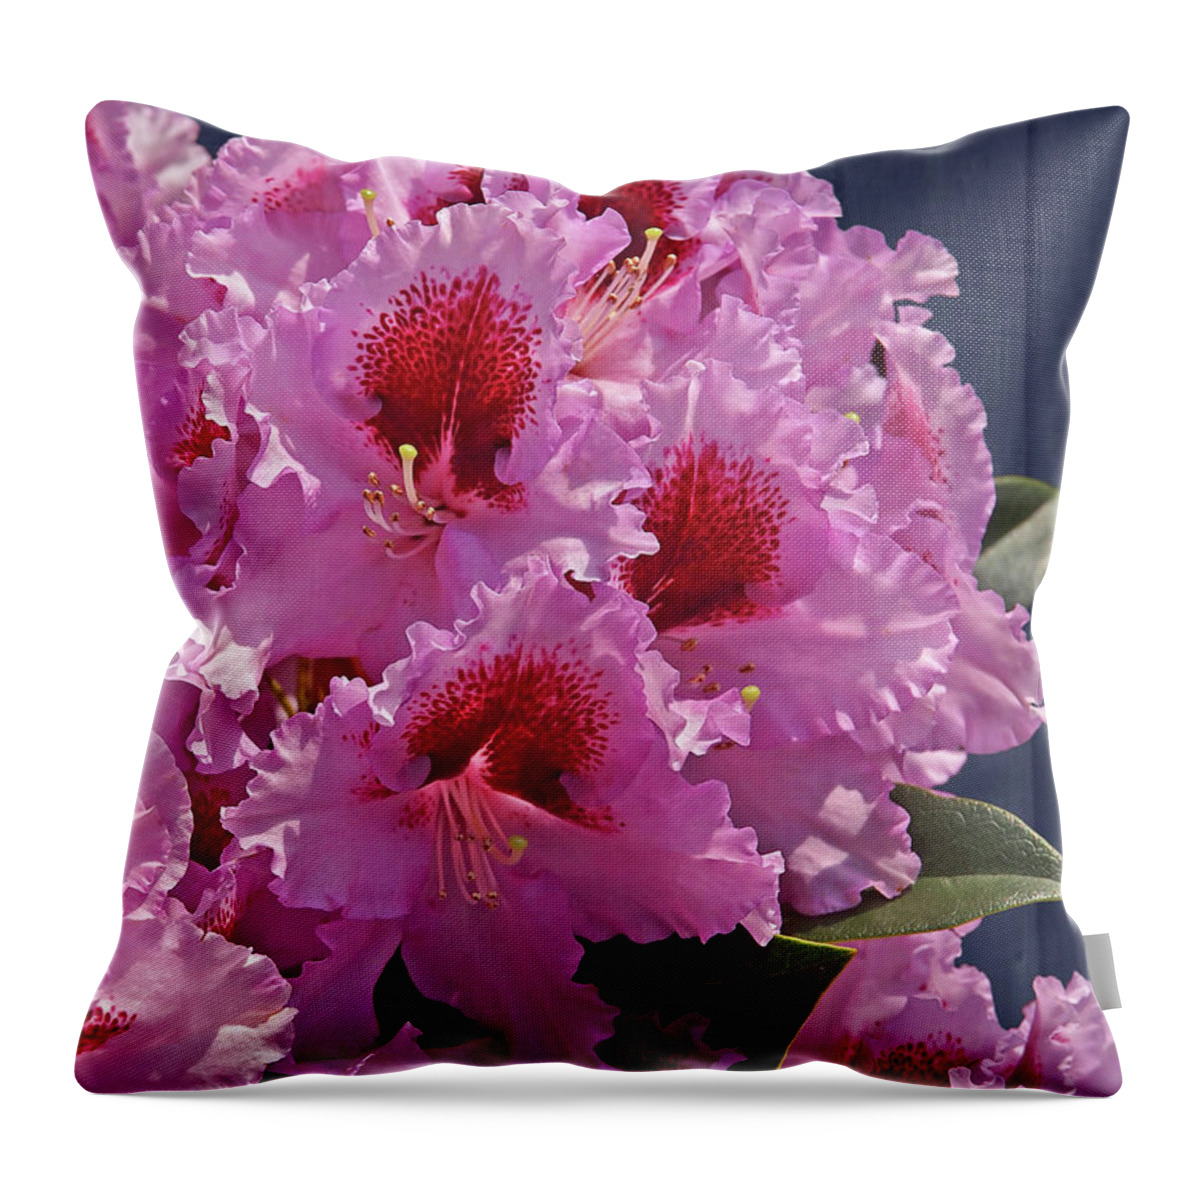 Pink Flower Throw Pillow featuring the photograph Frilly Pink Rhododendron by Gill Billington